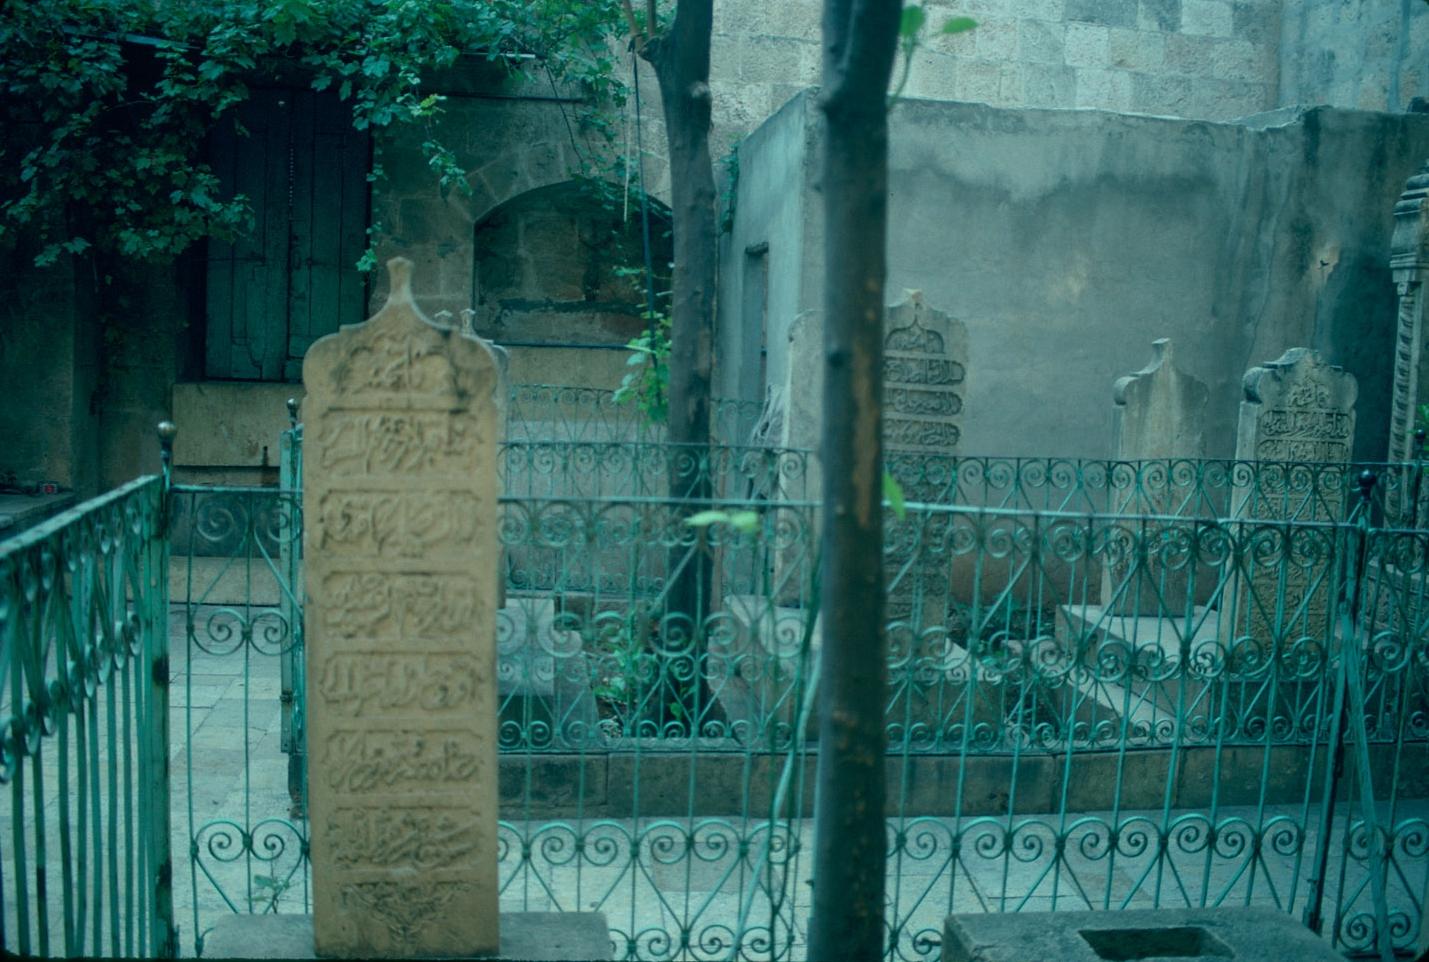 Tombstone in mosque courtyard